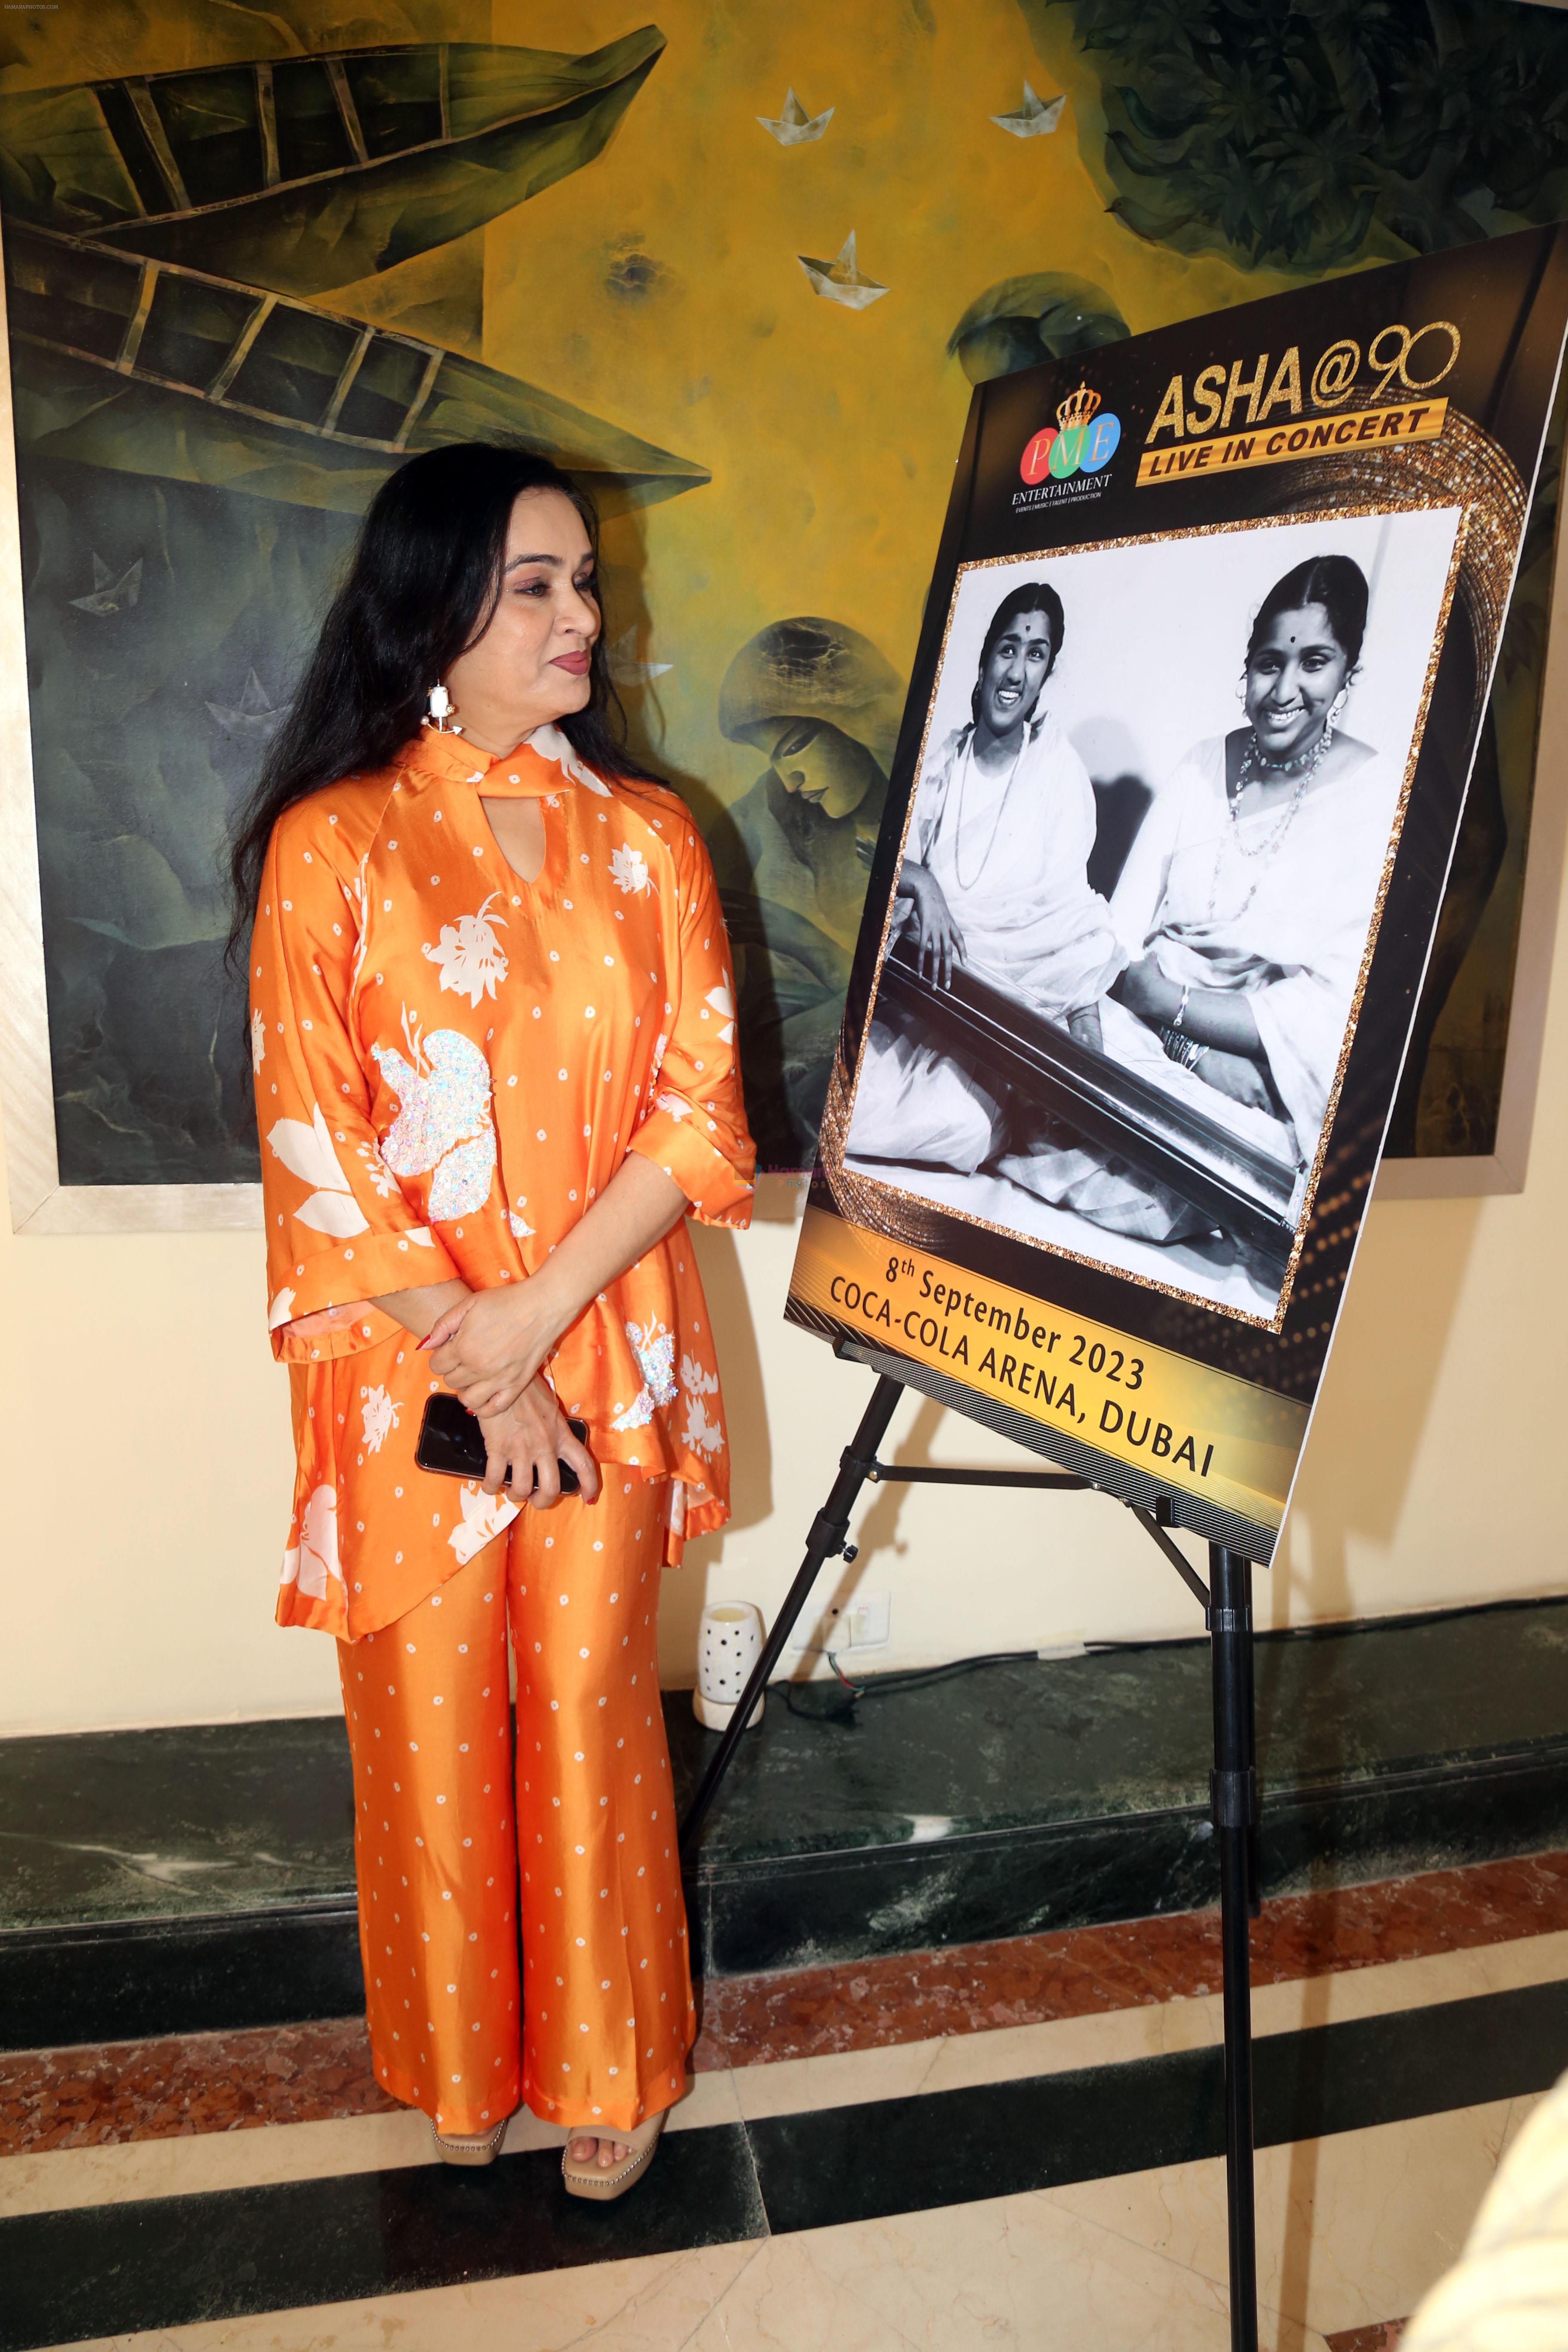 Padmini Kolhapure at the Press Conference for Asha@90 Live In Concert in Dubai on 8th August 2023